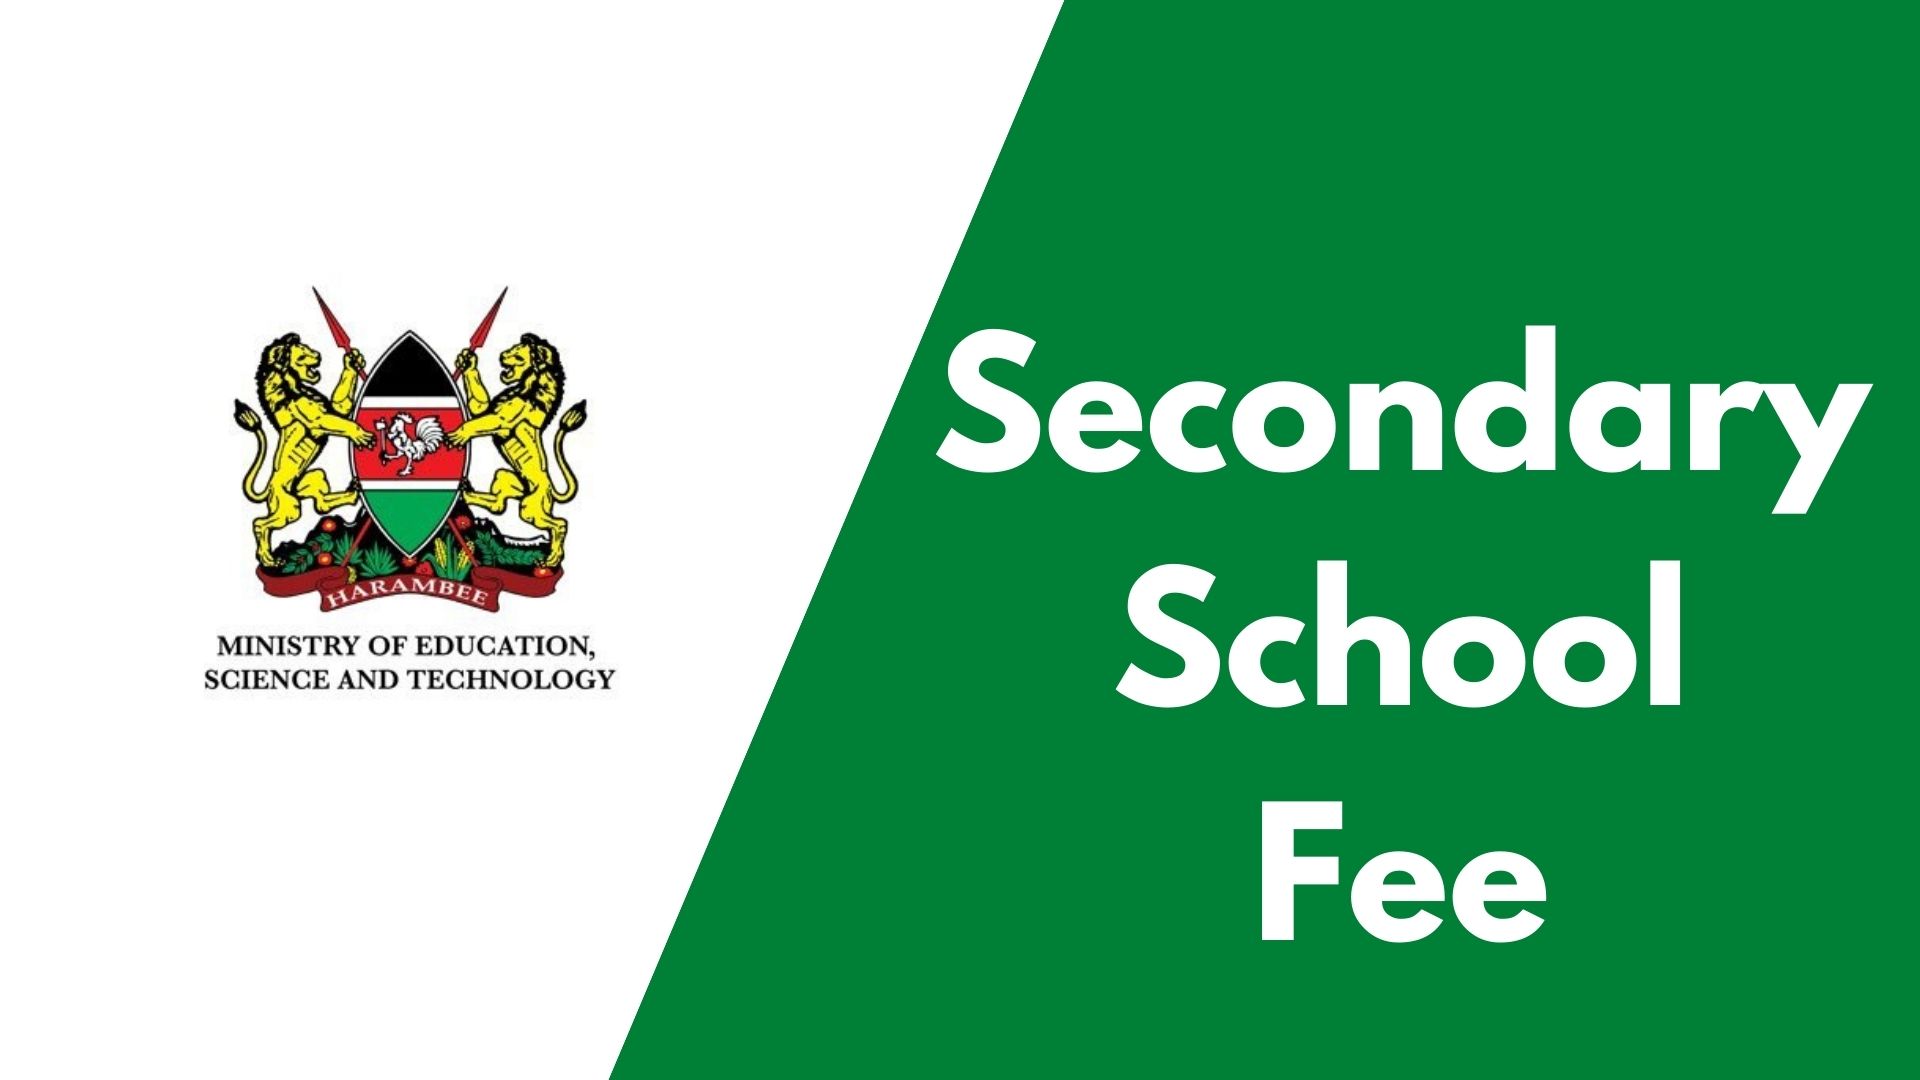 Secondary school fees in kenya and government funding stats